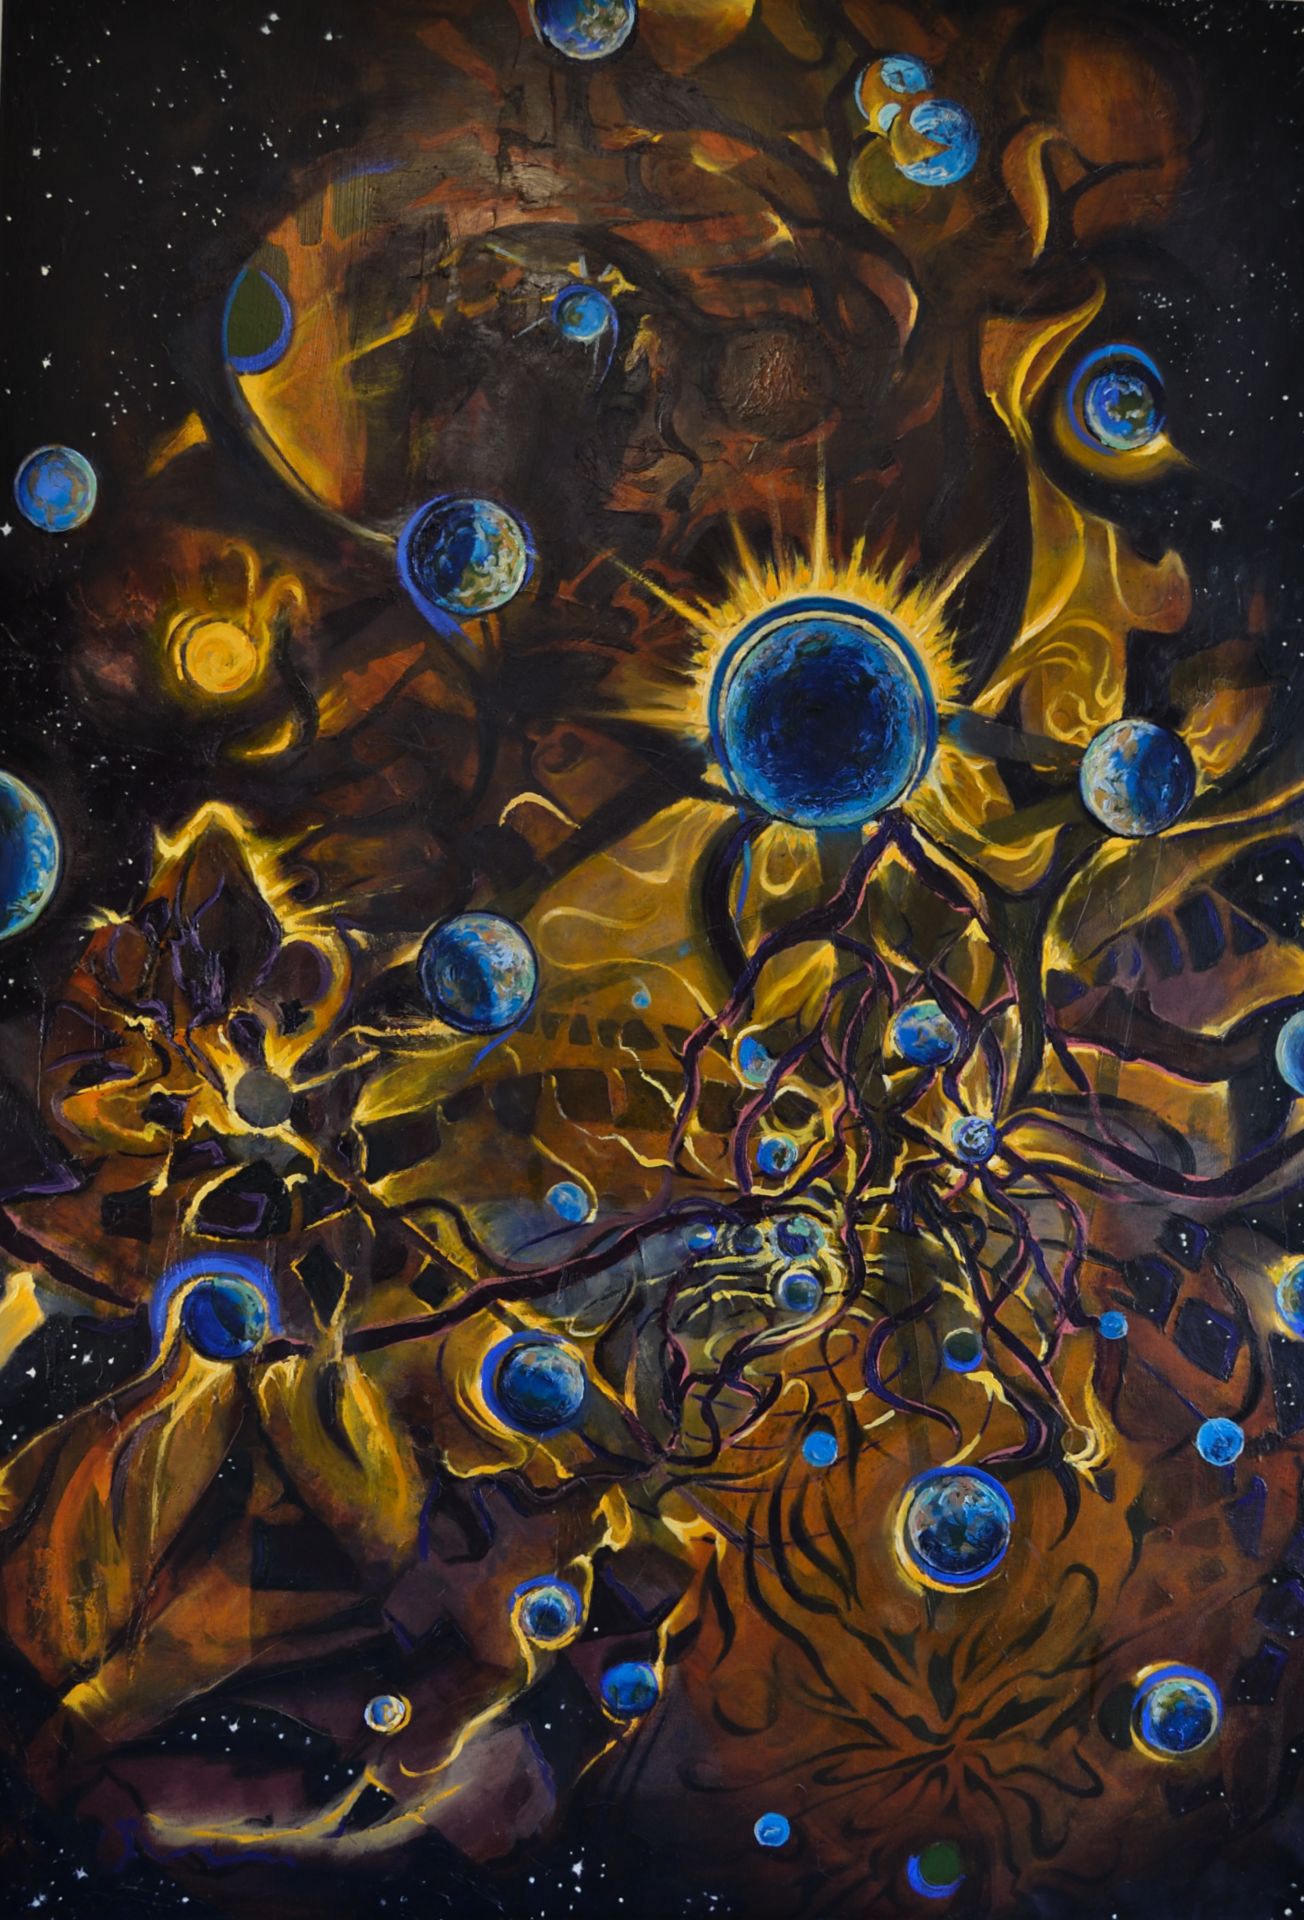 Seed Planets, 49 x 72, oil on canvass, Mar. 2015